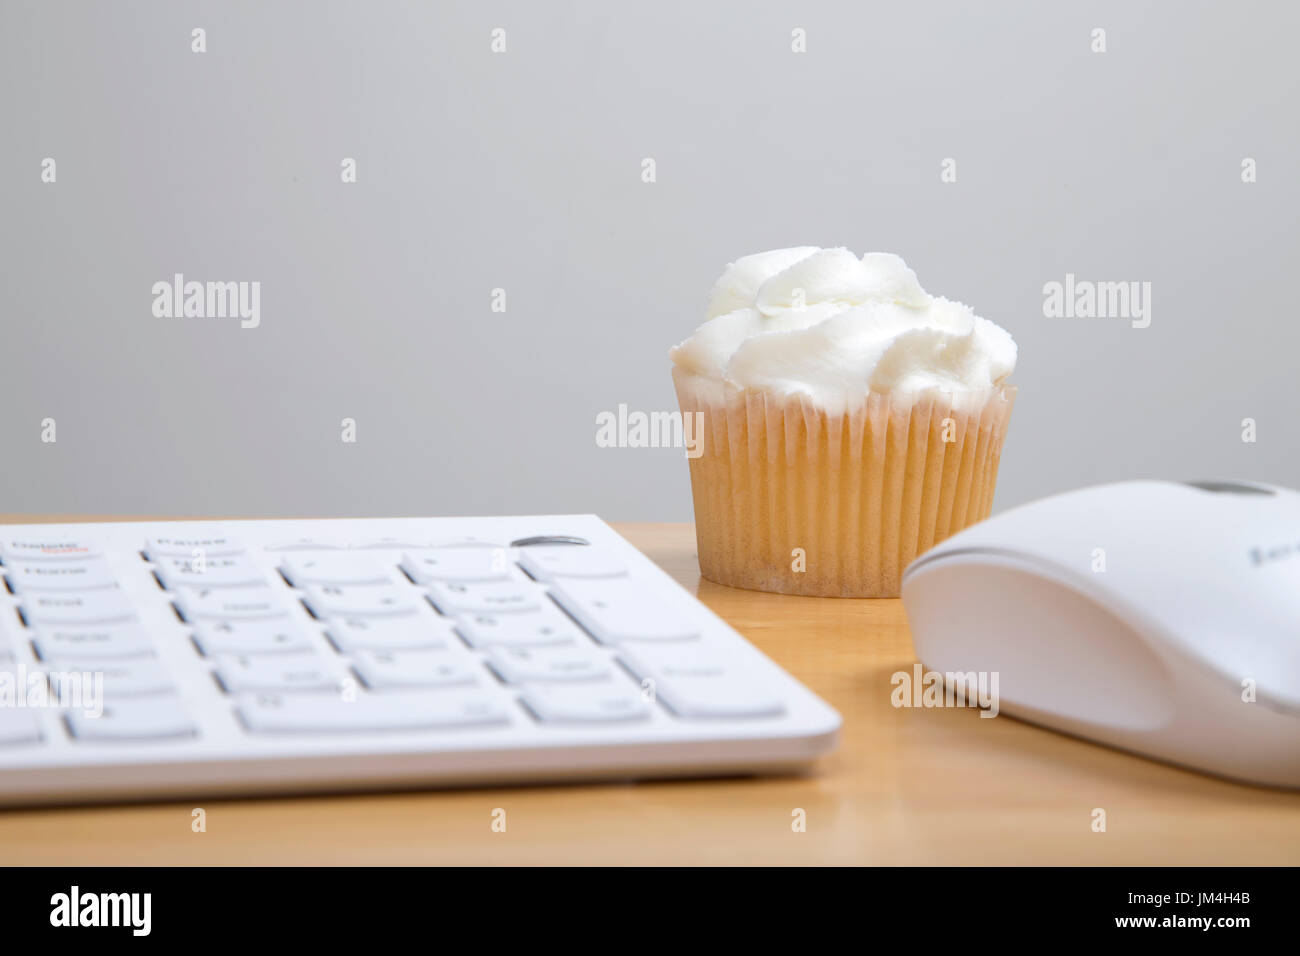 Butter icing cupcake sitting on work desk with keyboard and mouse Stock Photo